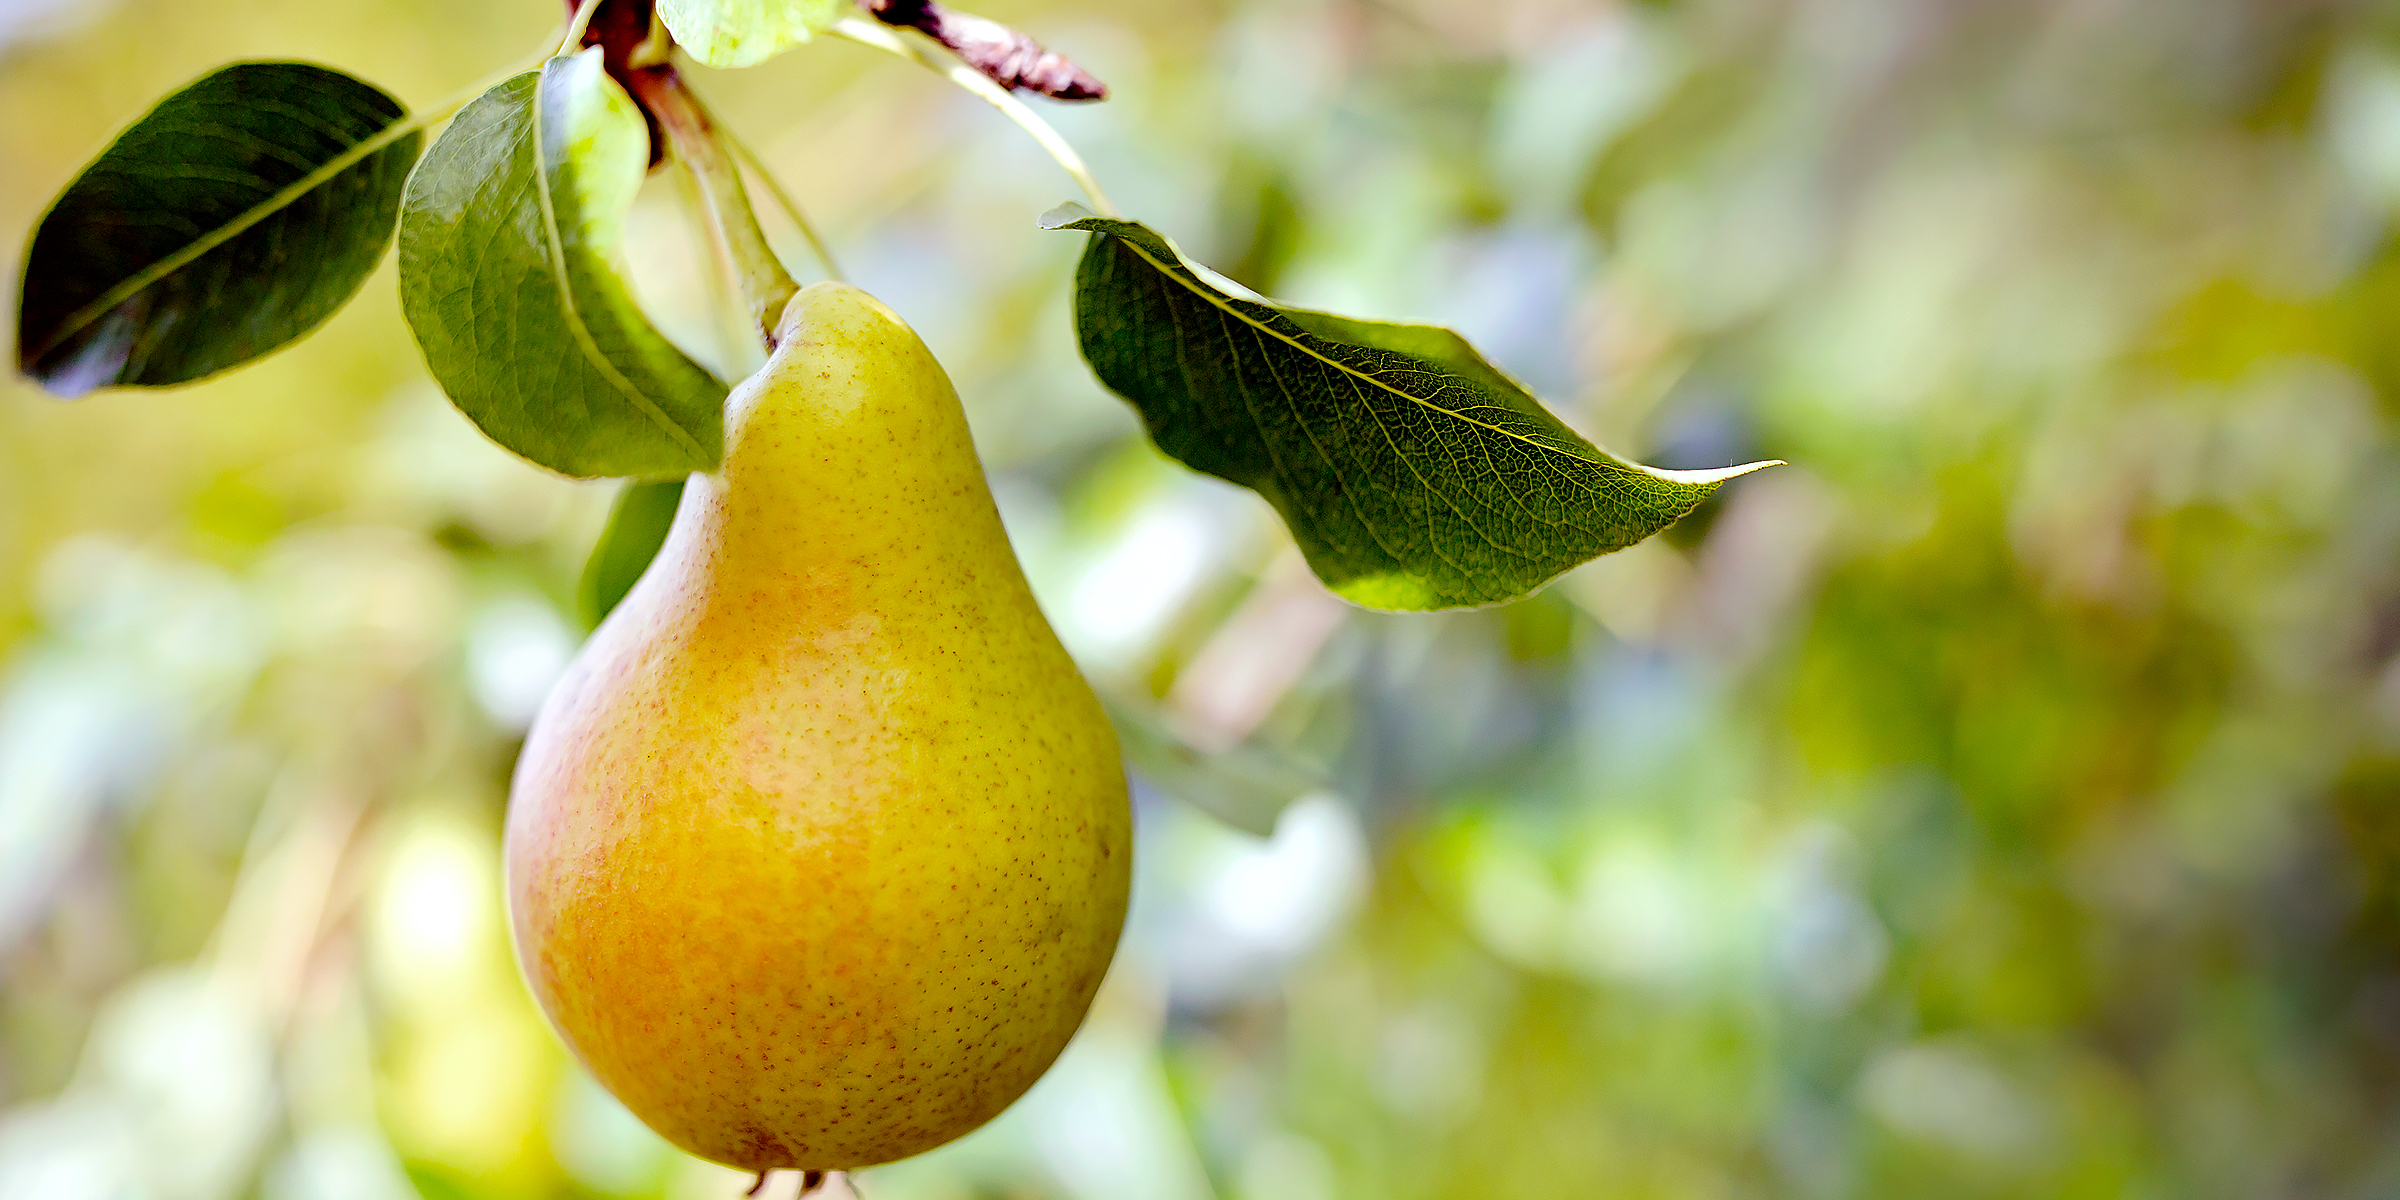 A pear | Source: Getty Images